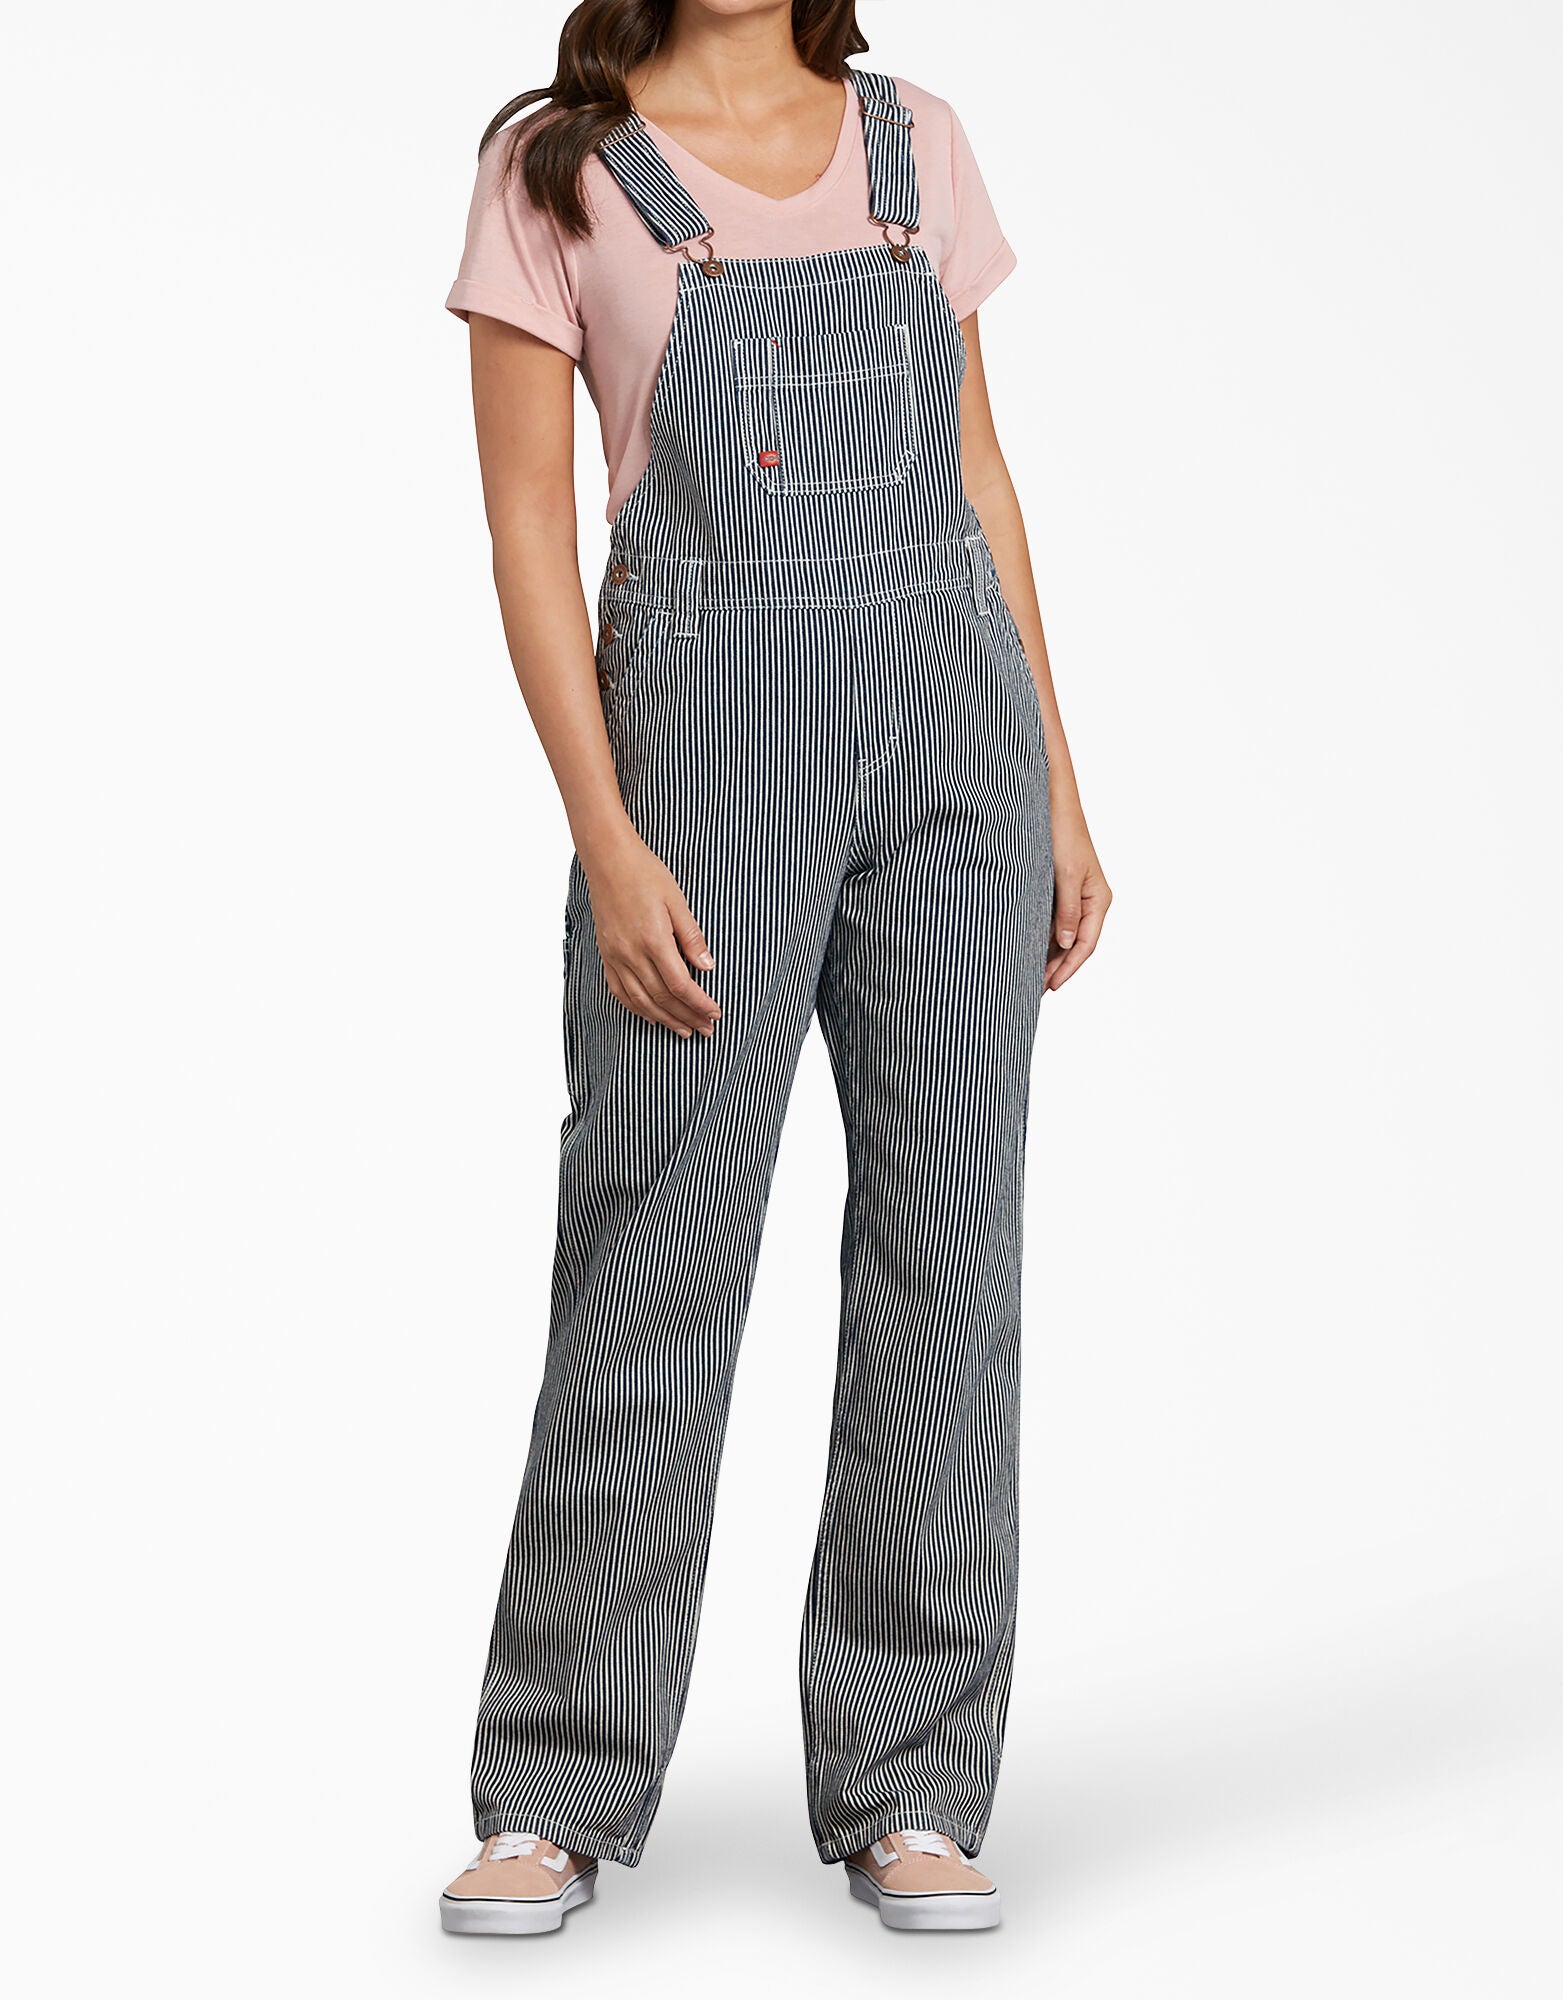 DICKIES WOMENS RELAXED FIT BIB OVERALLS